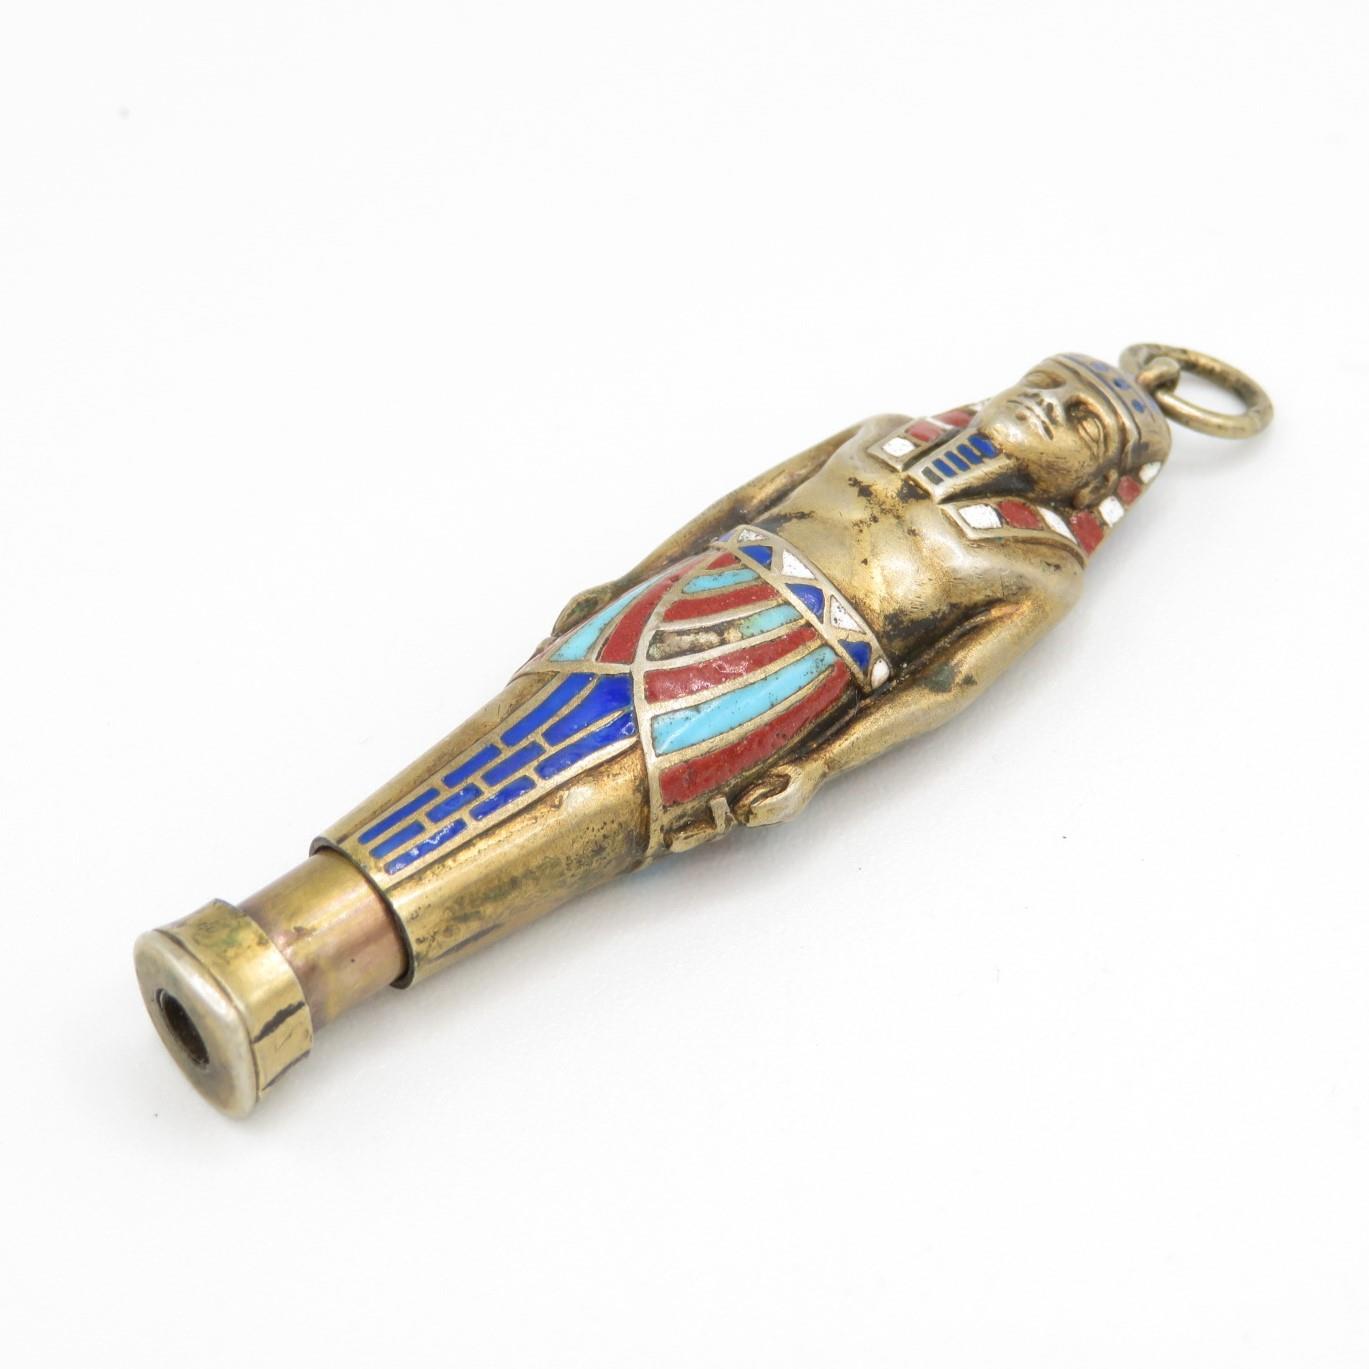 Silver Egyptian revival mechanical pencil (as found) (12g) - Image 6 of 6